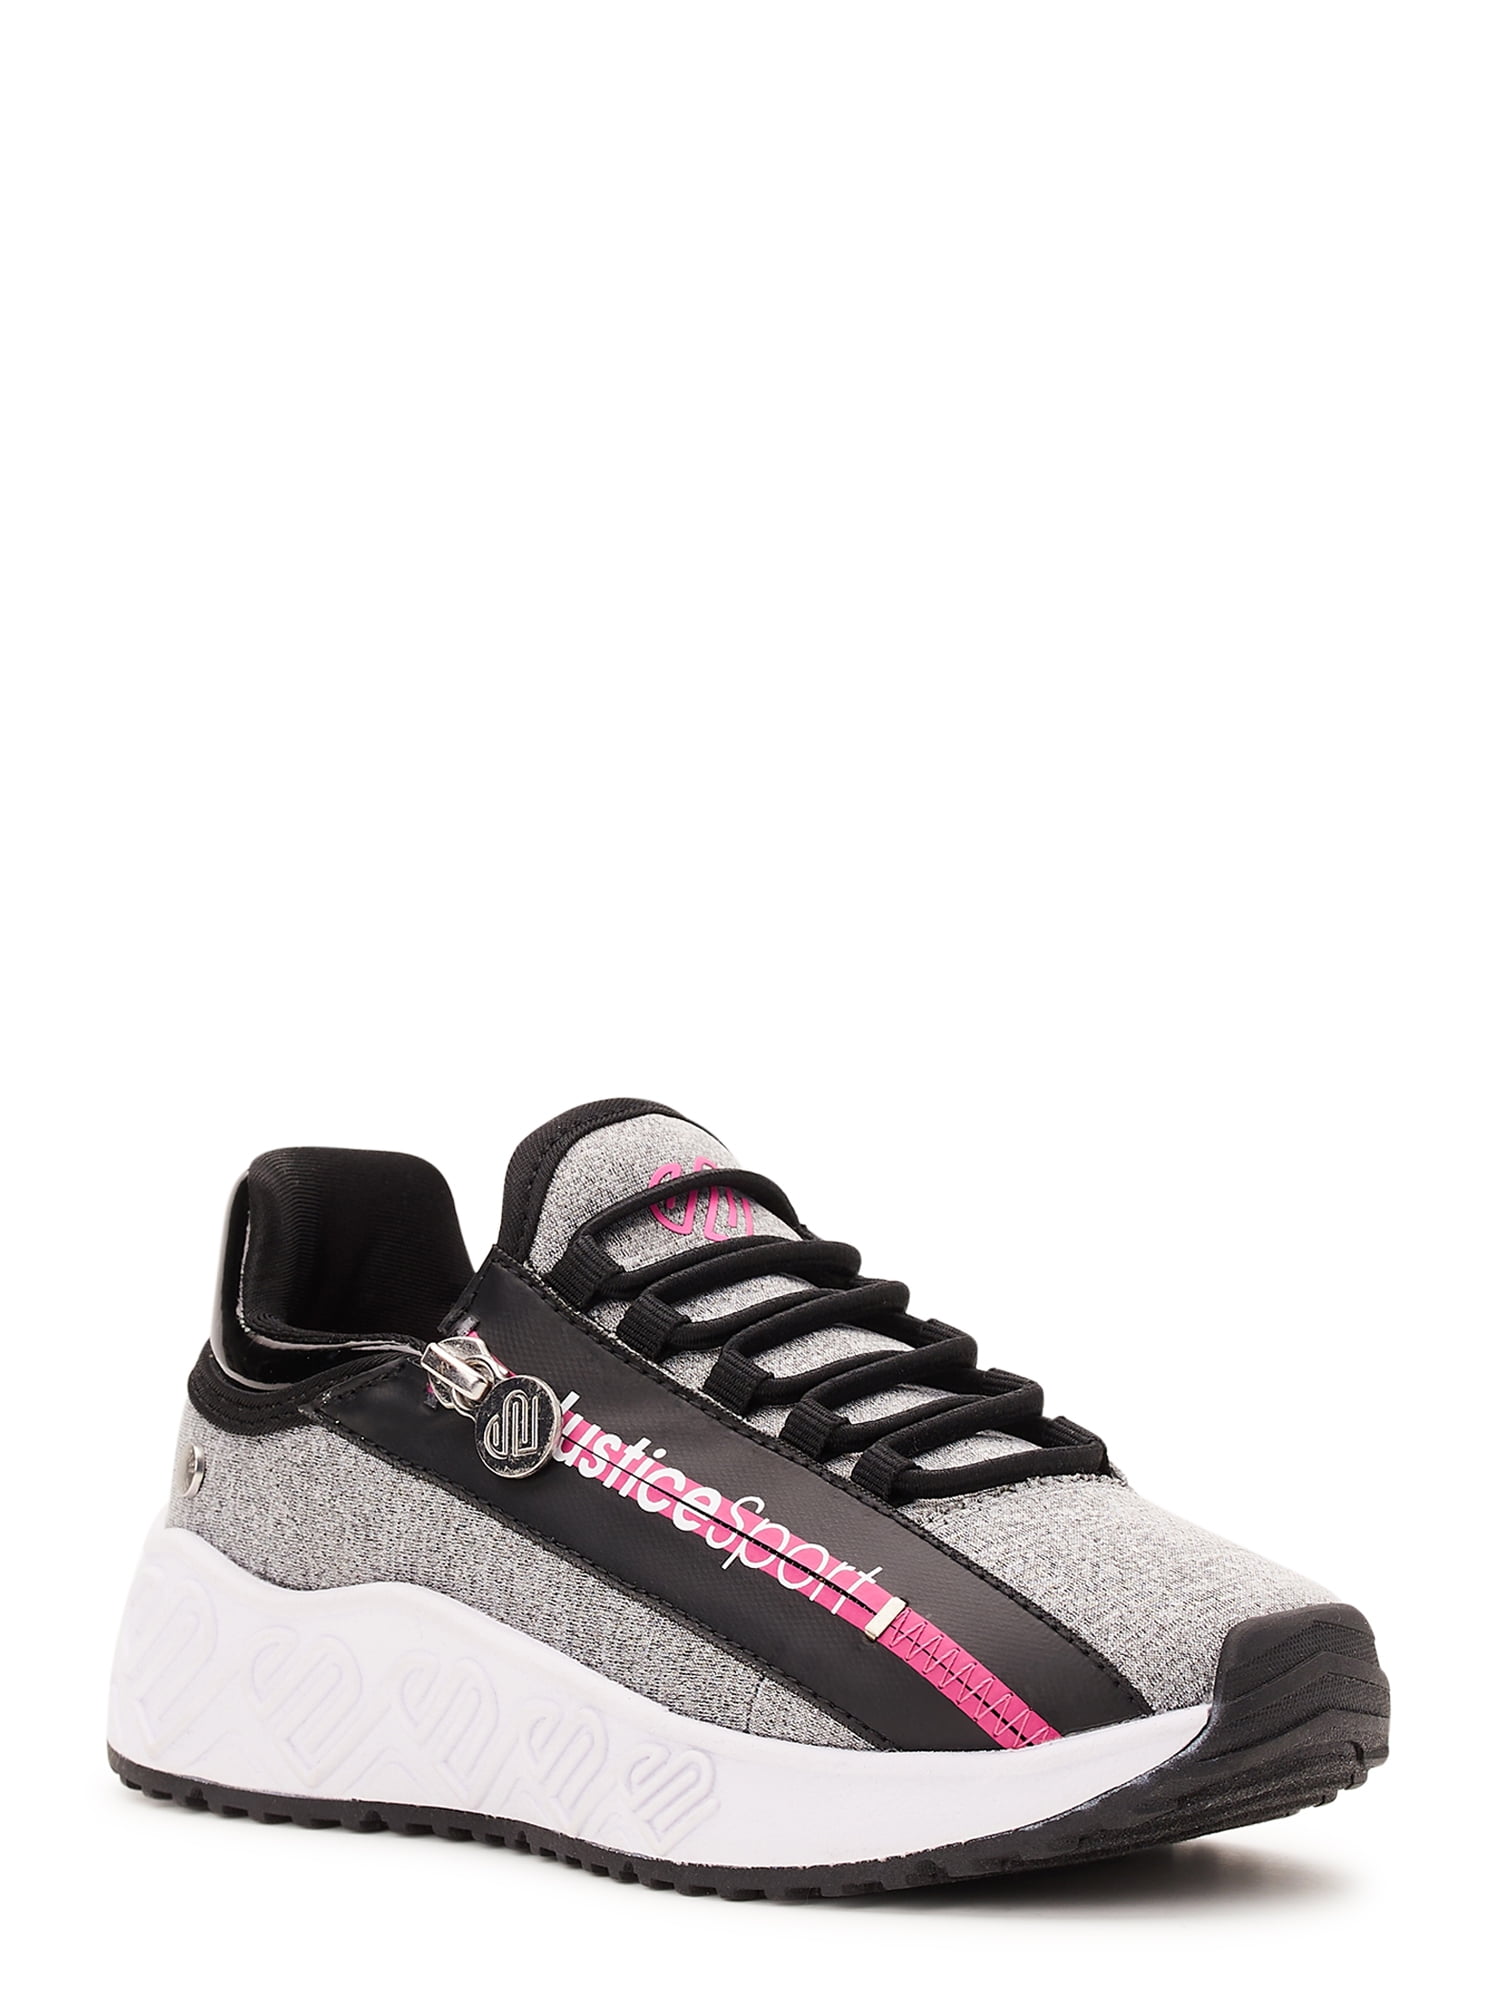 Justice Little Girl & Girl Athletic Side Sneakers, 13-4 - Walmart.com